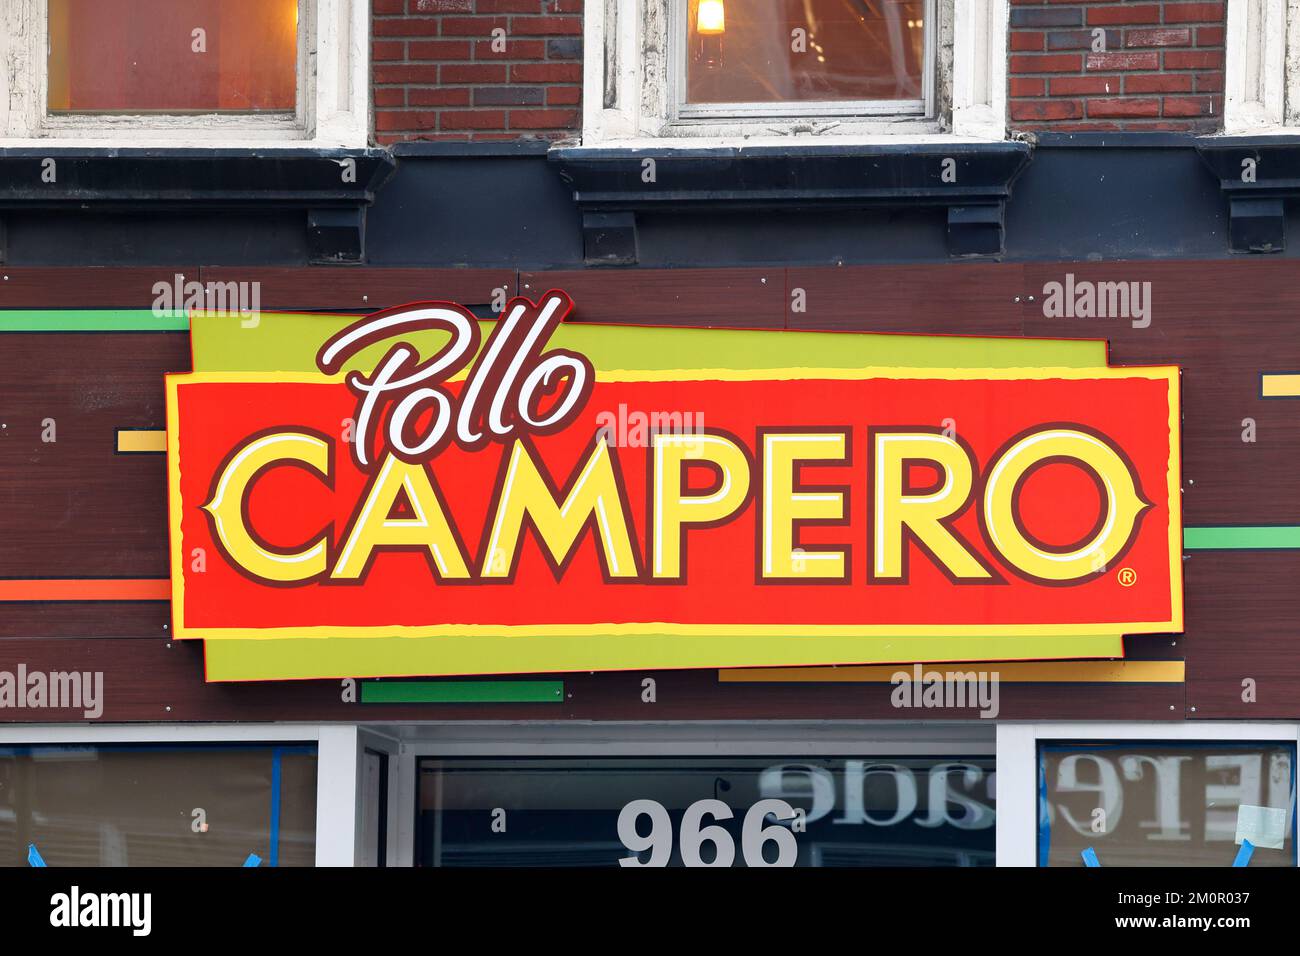 Signage for Pollo Campero, Guatemalan fried chicken, at a store in Midtown Manhattan, New York Stock Photo